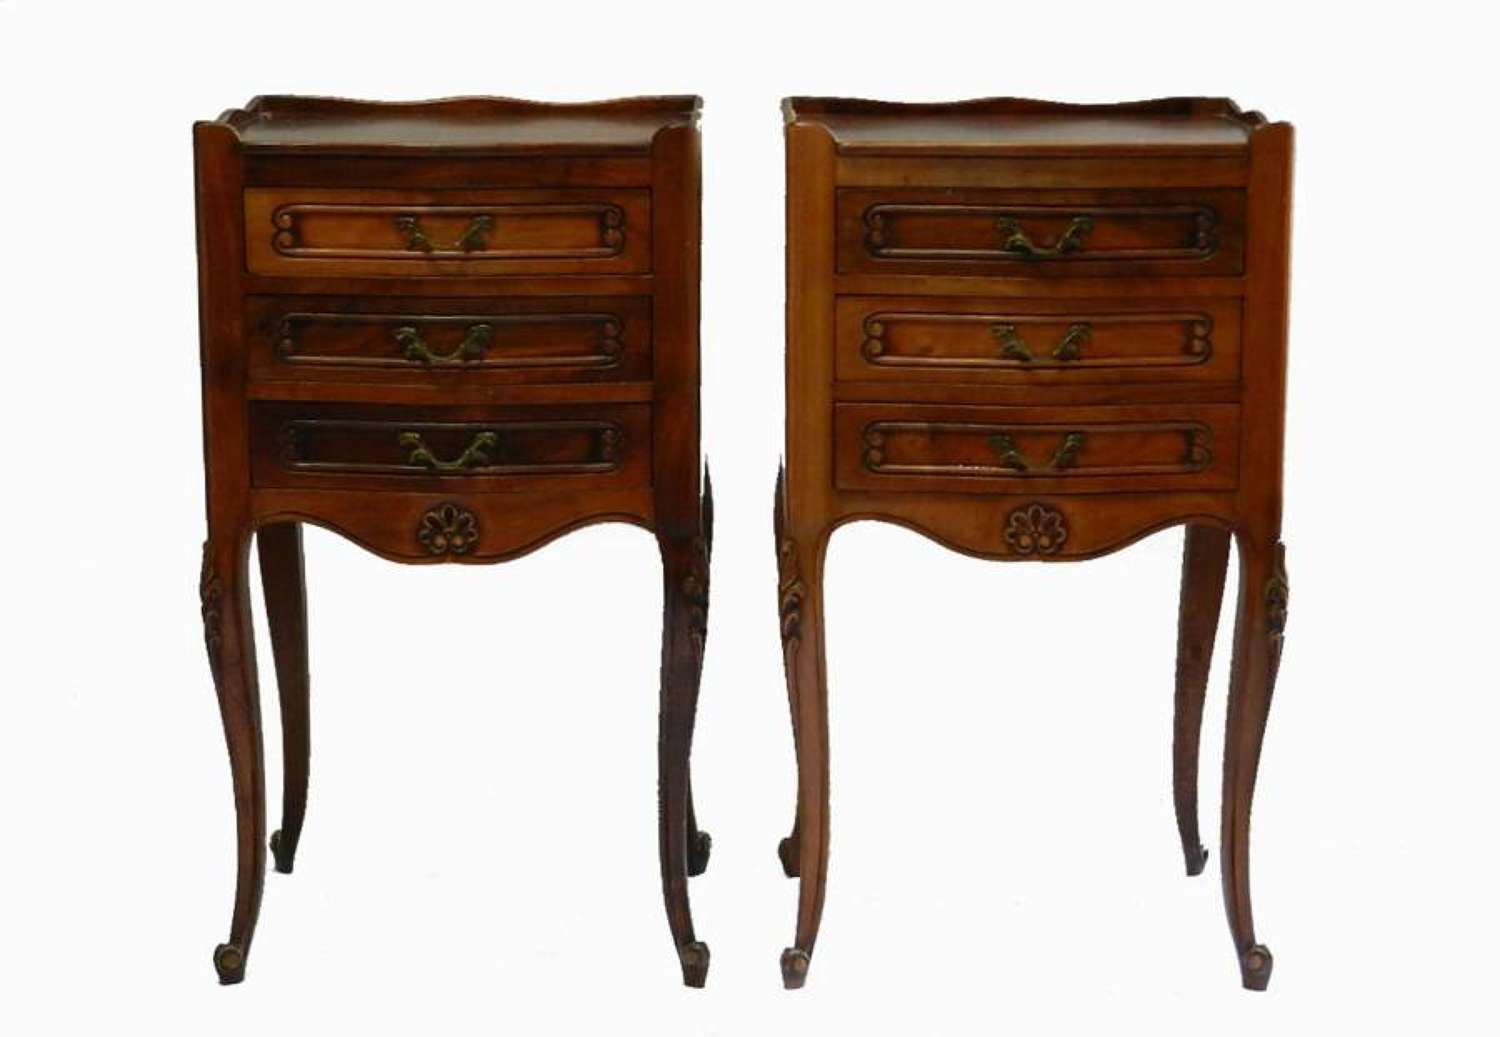 Pair of French Bedside Tables Louis rev Side Cabinets Nightstand